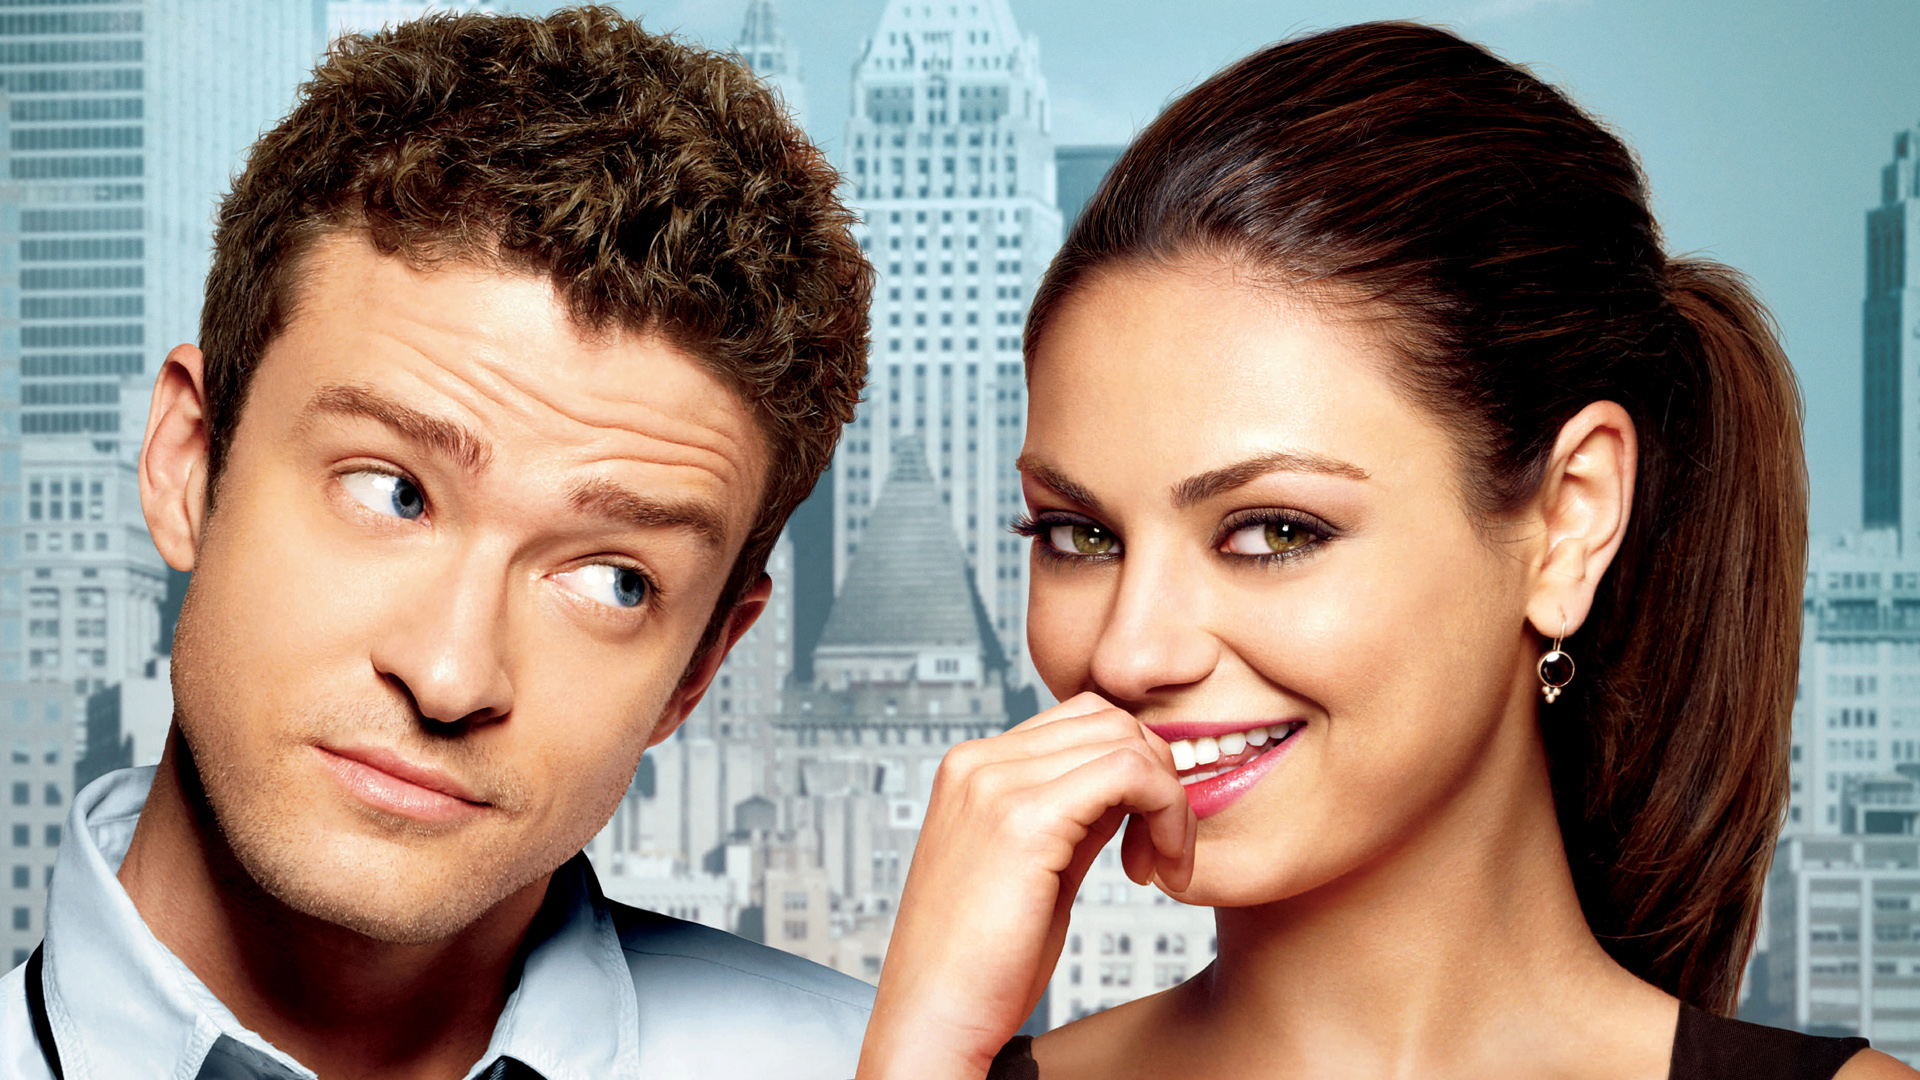 Wallpaper Justin Timberlake & Mila Kunis in Friends with Benefits movie